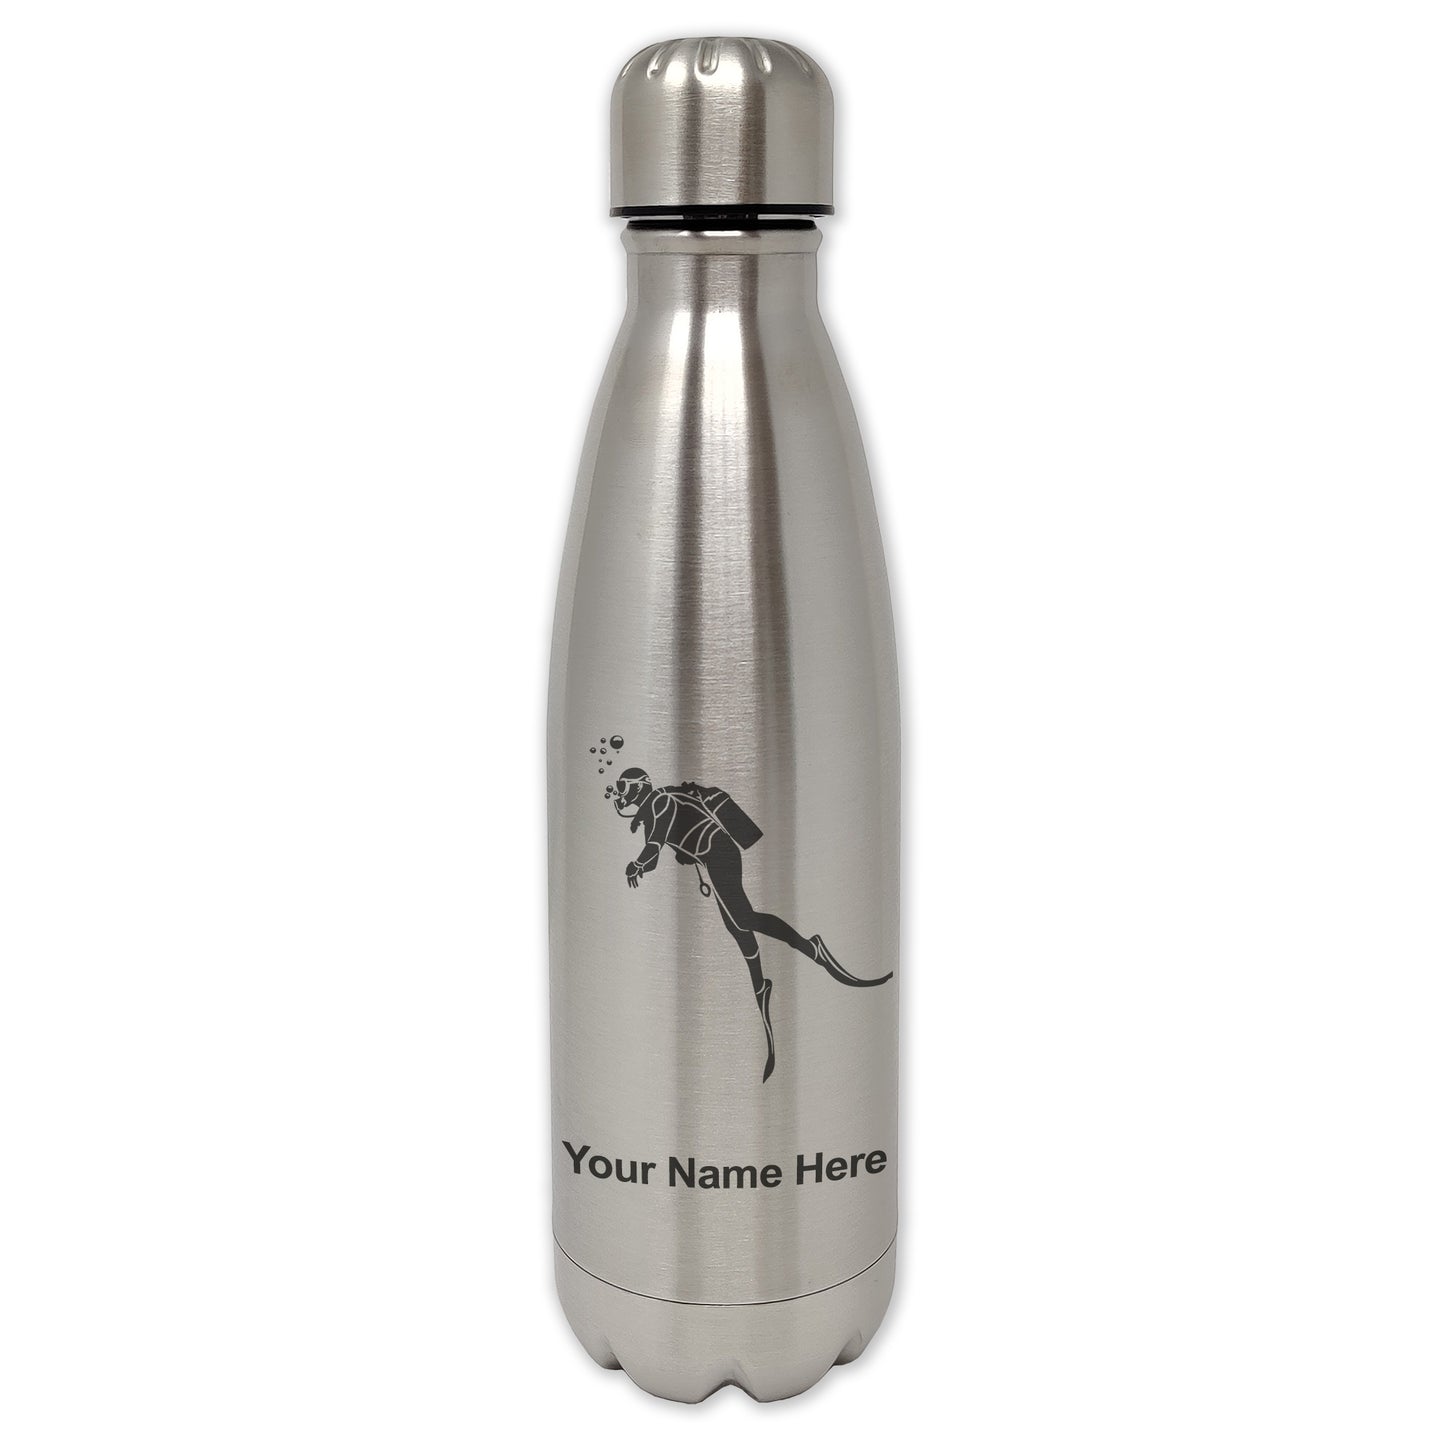 LaserGram Single Wall Water Bottle, Scuba Diver, Personalized Engraving Included